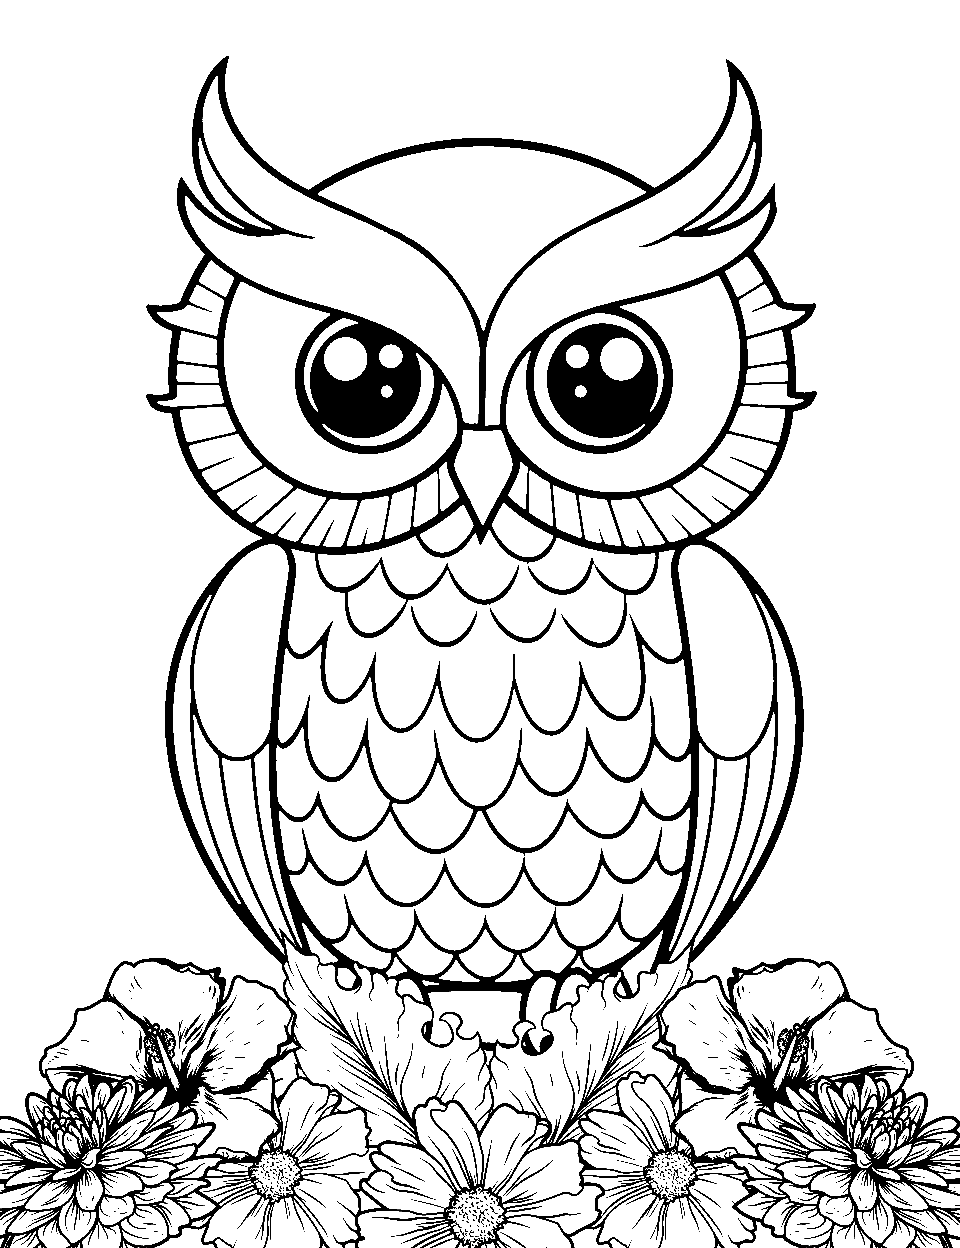 Garden Owl Coloring Page - An owl surrounded by a variety of flowers.